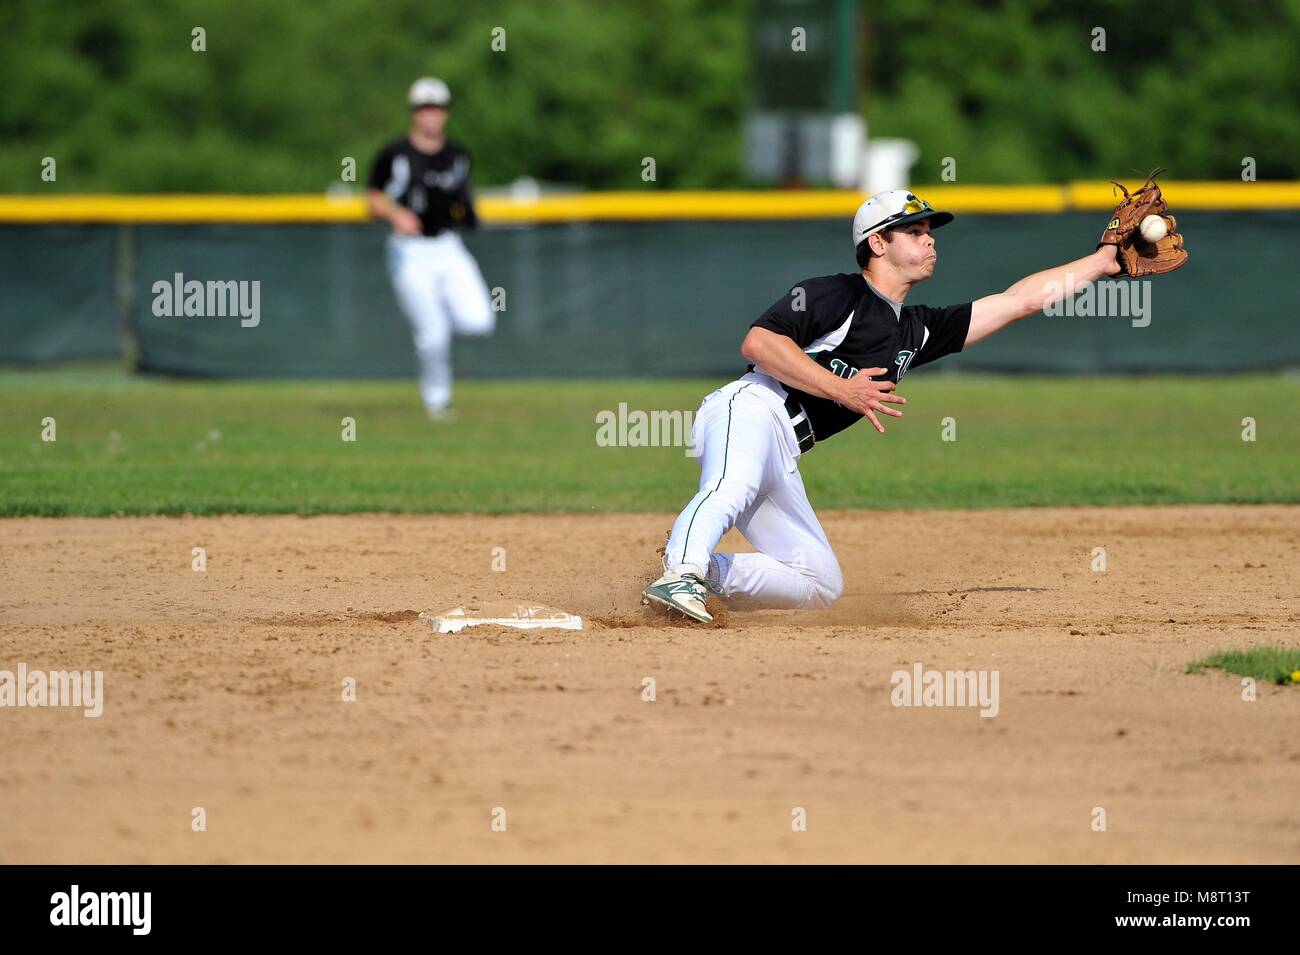 Second baseman lunging to catch a throw from his catcher in an effort to retire a base runner from stealing second base. USA. Stock Photo